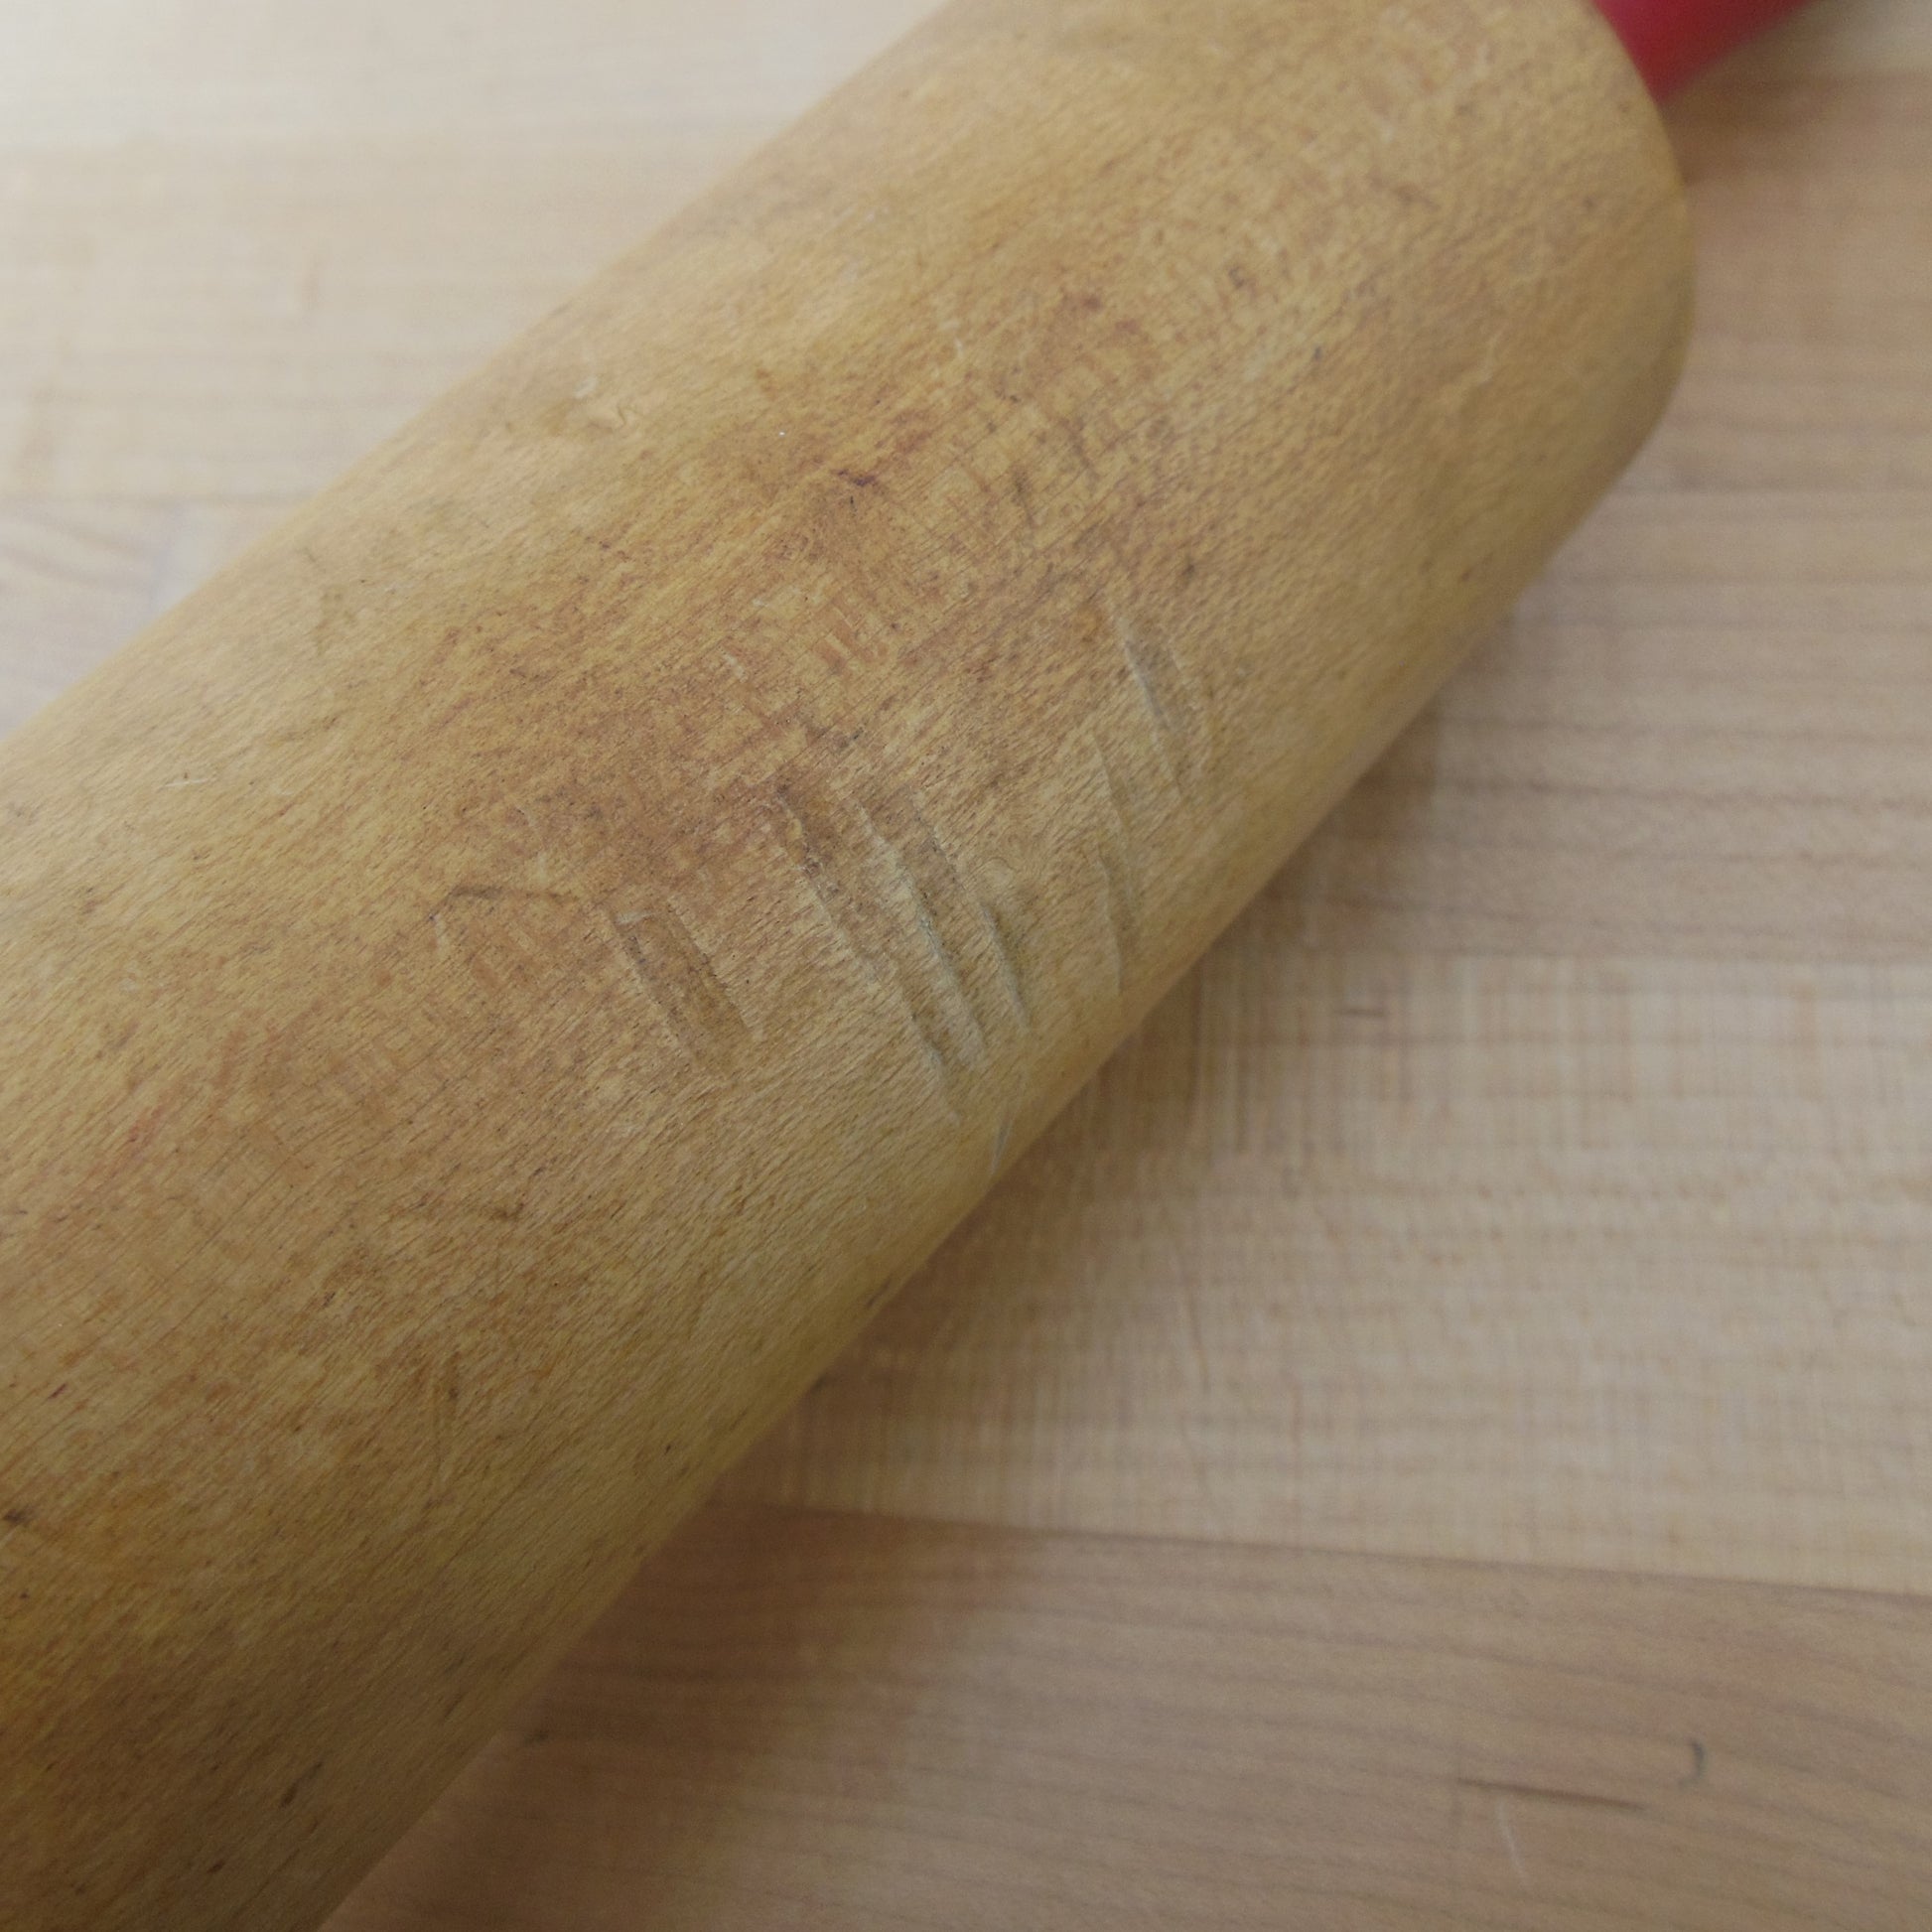 Munising Maple Rolling Pin Red Handles Used